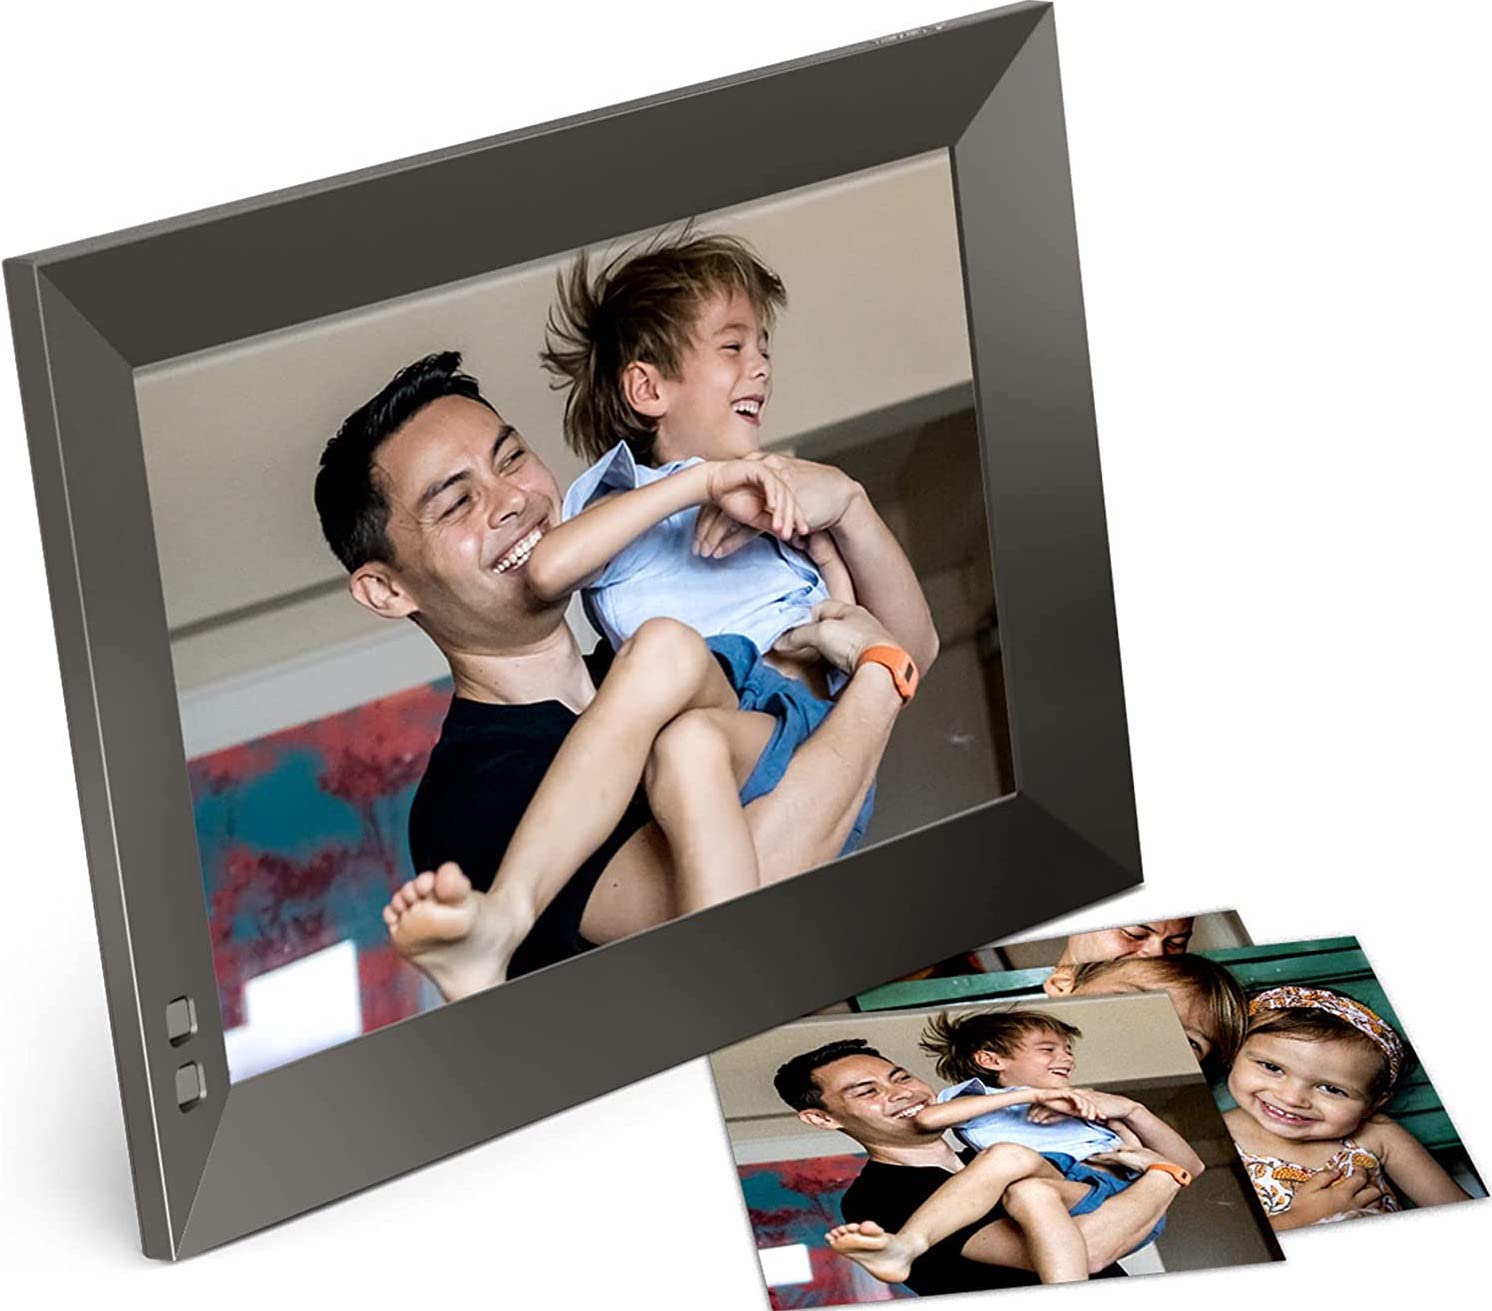 Show off your pictures with a smart digital photo frame